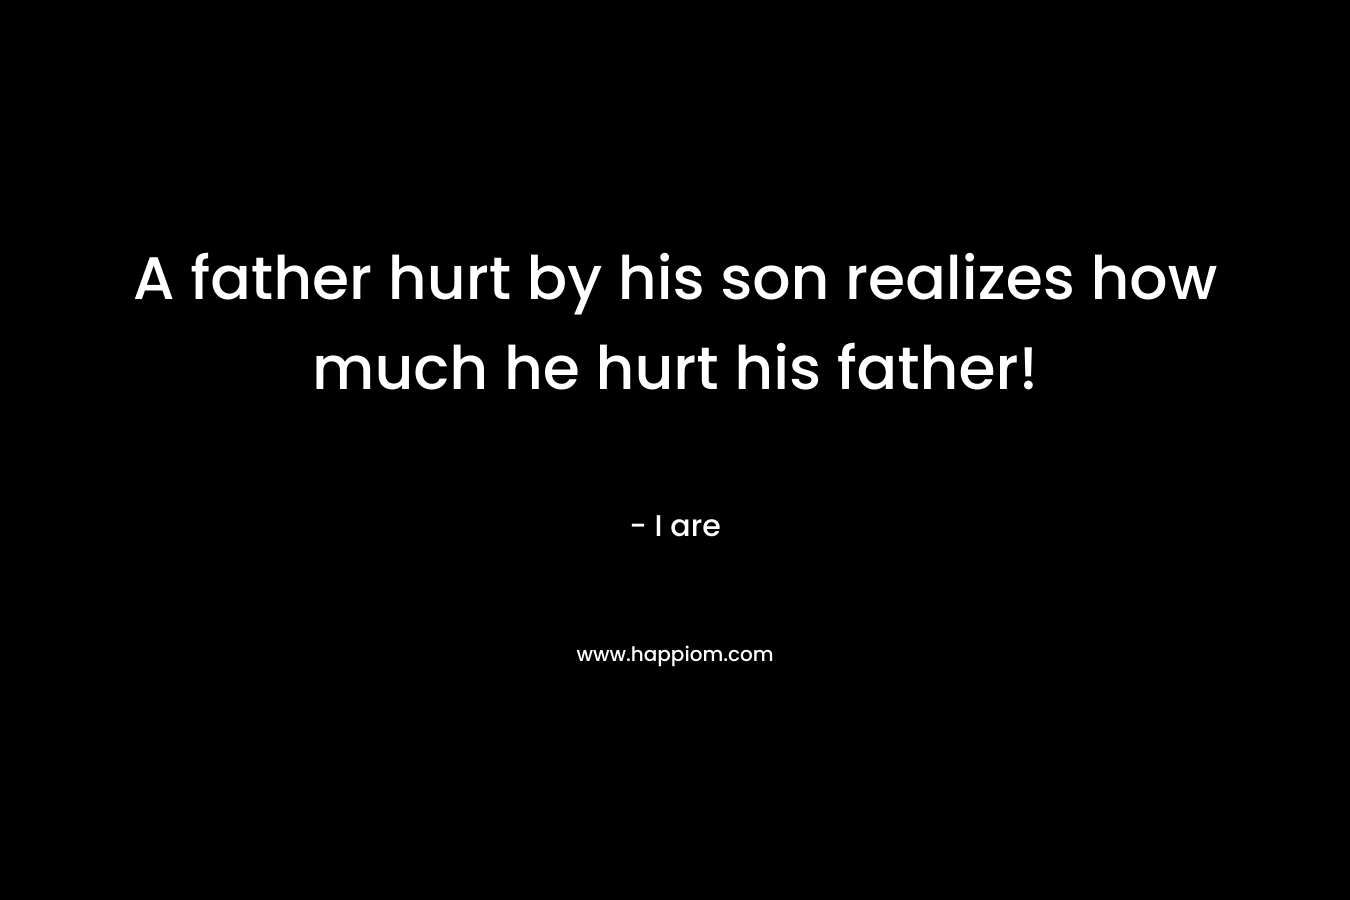 A father hurt by his son realizes how much he hurt his father!